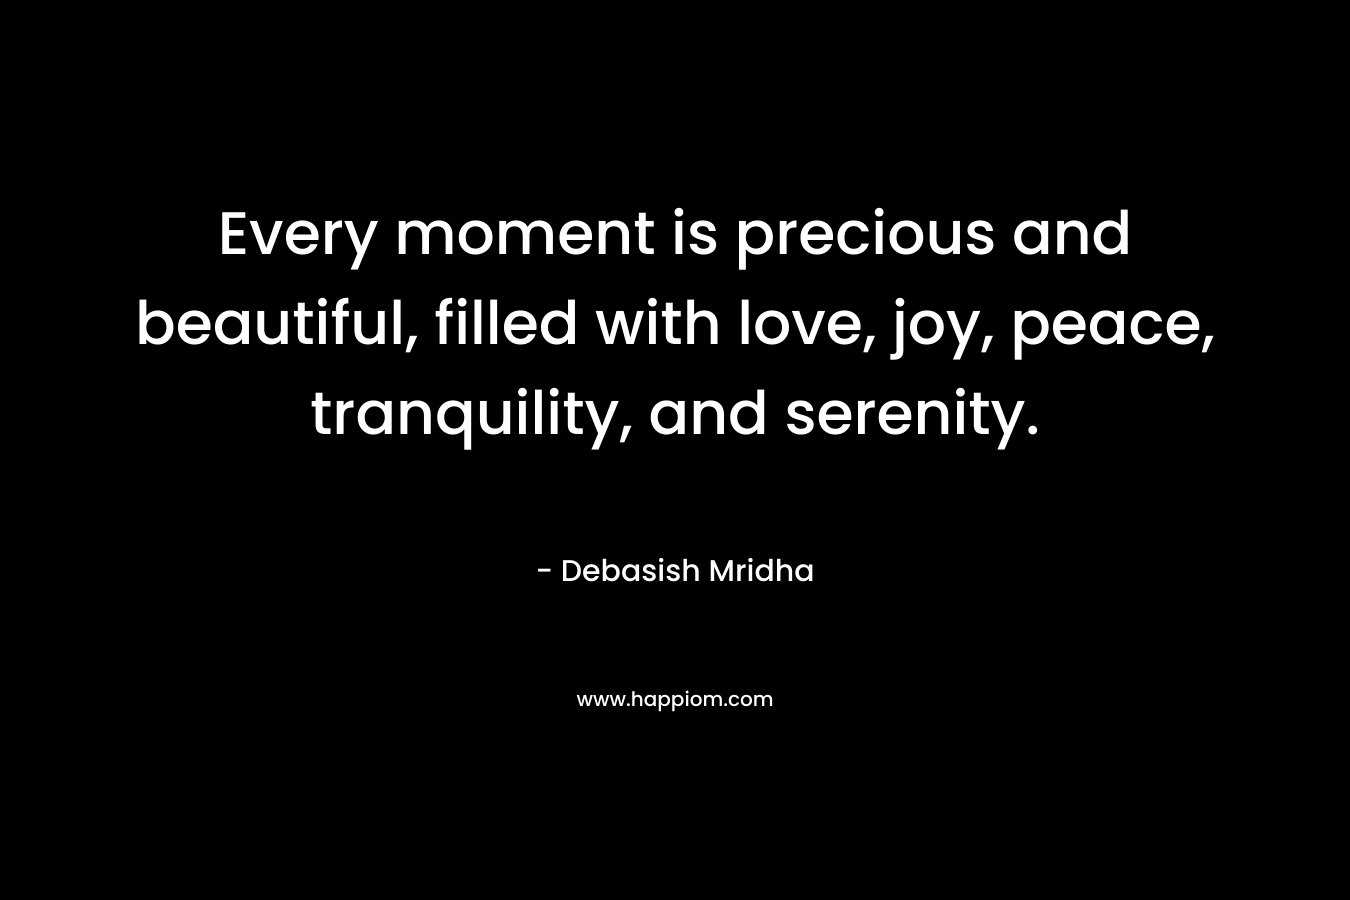 Every moment is precious and beautiful, filled with love, joy, peace, tranquility, and serenity.